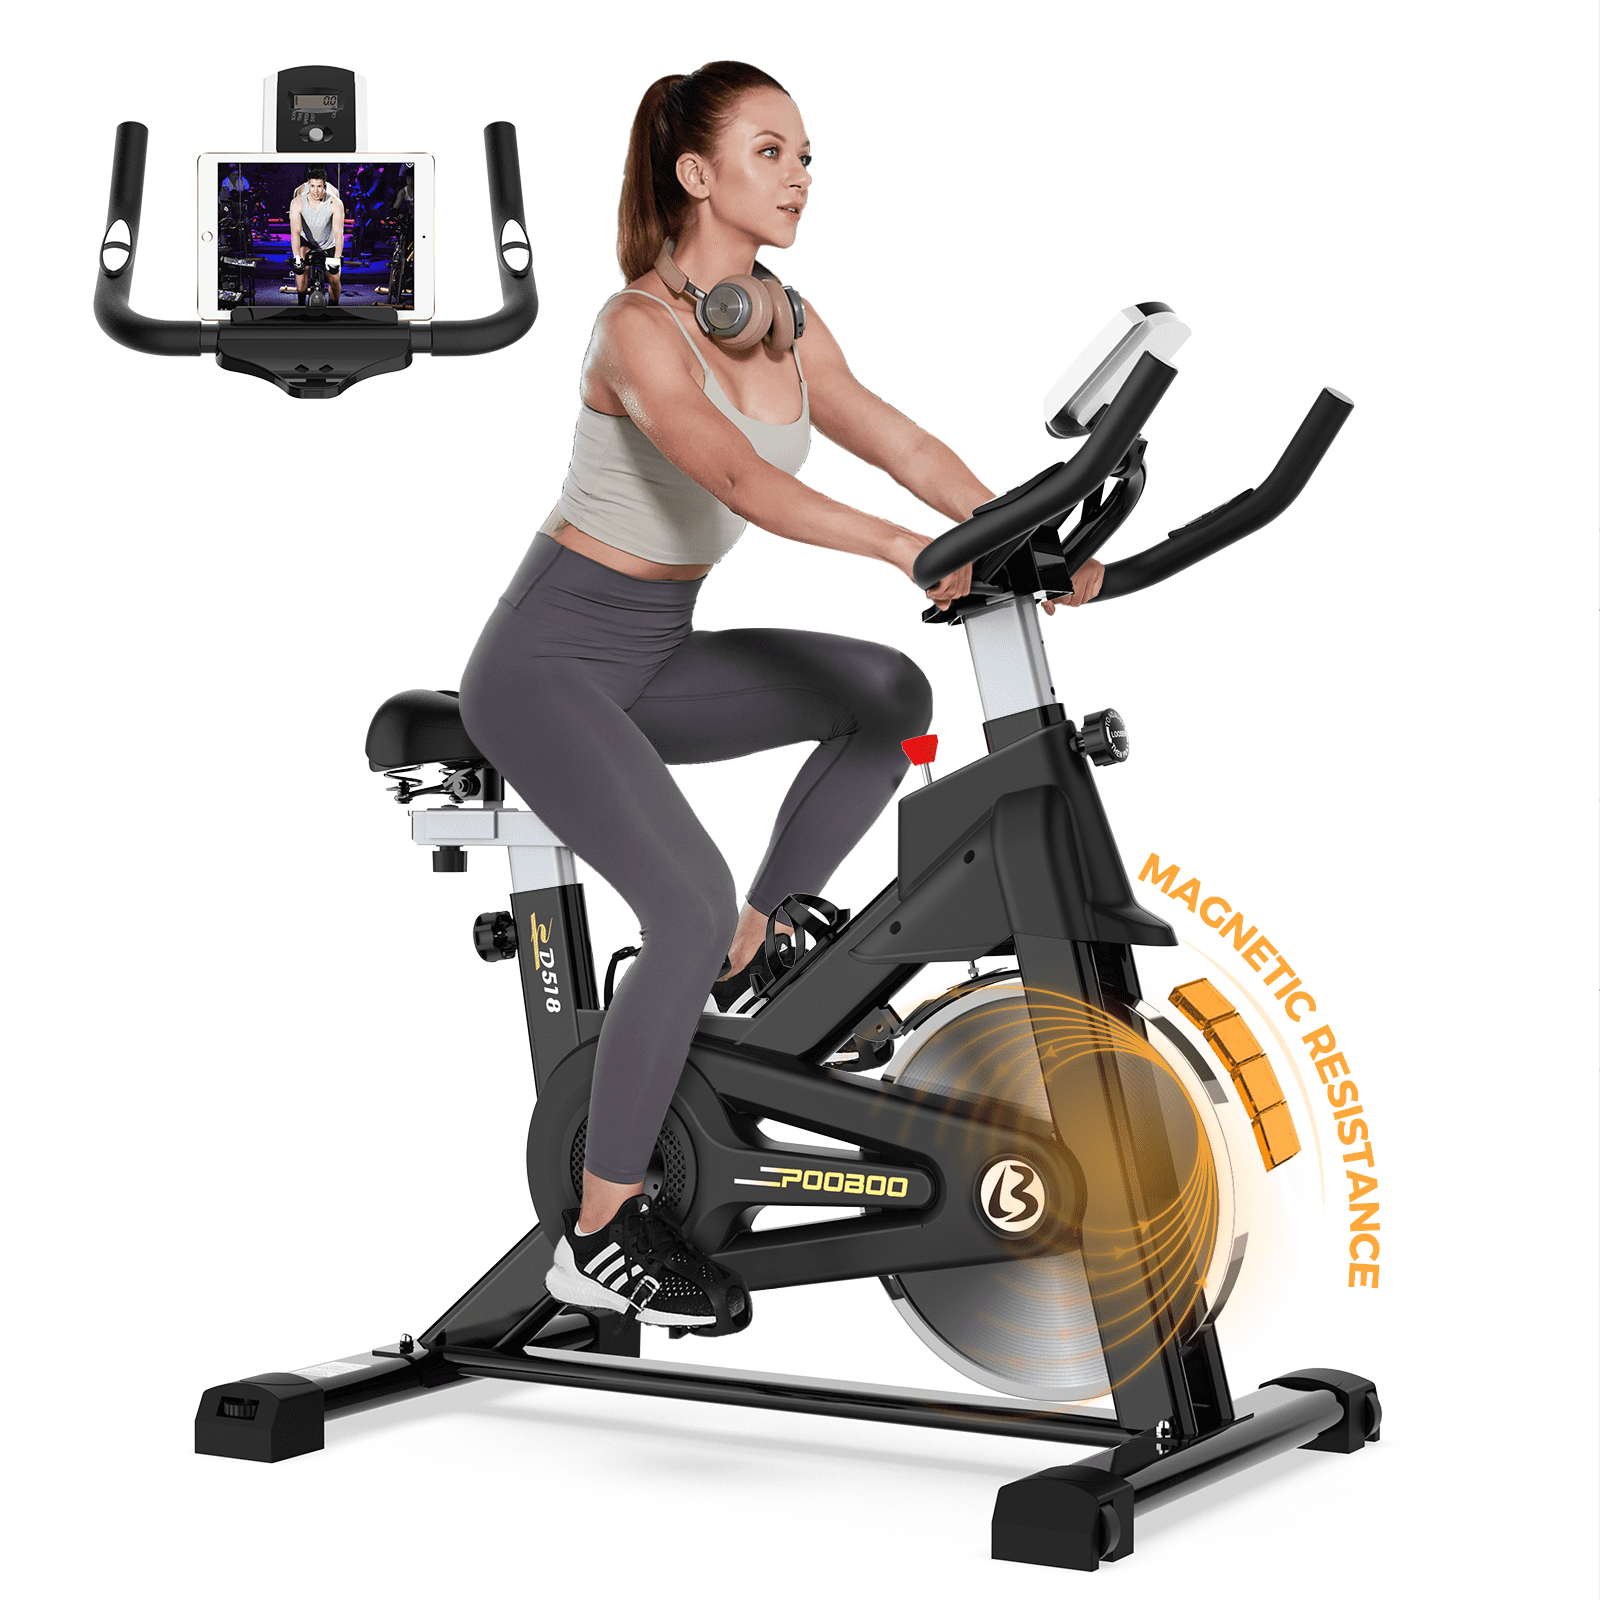 Details about   HEKA Best Choice Exercise Bicycle Cycling Fitness Stationary Bike Cardio Indoor 